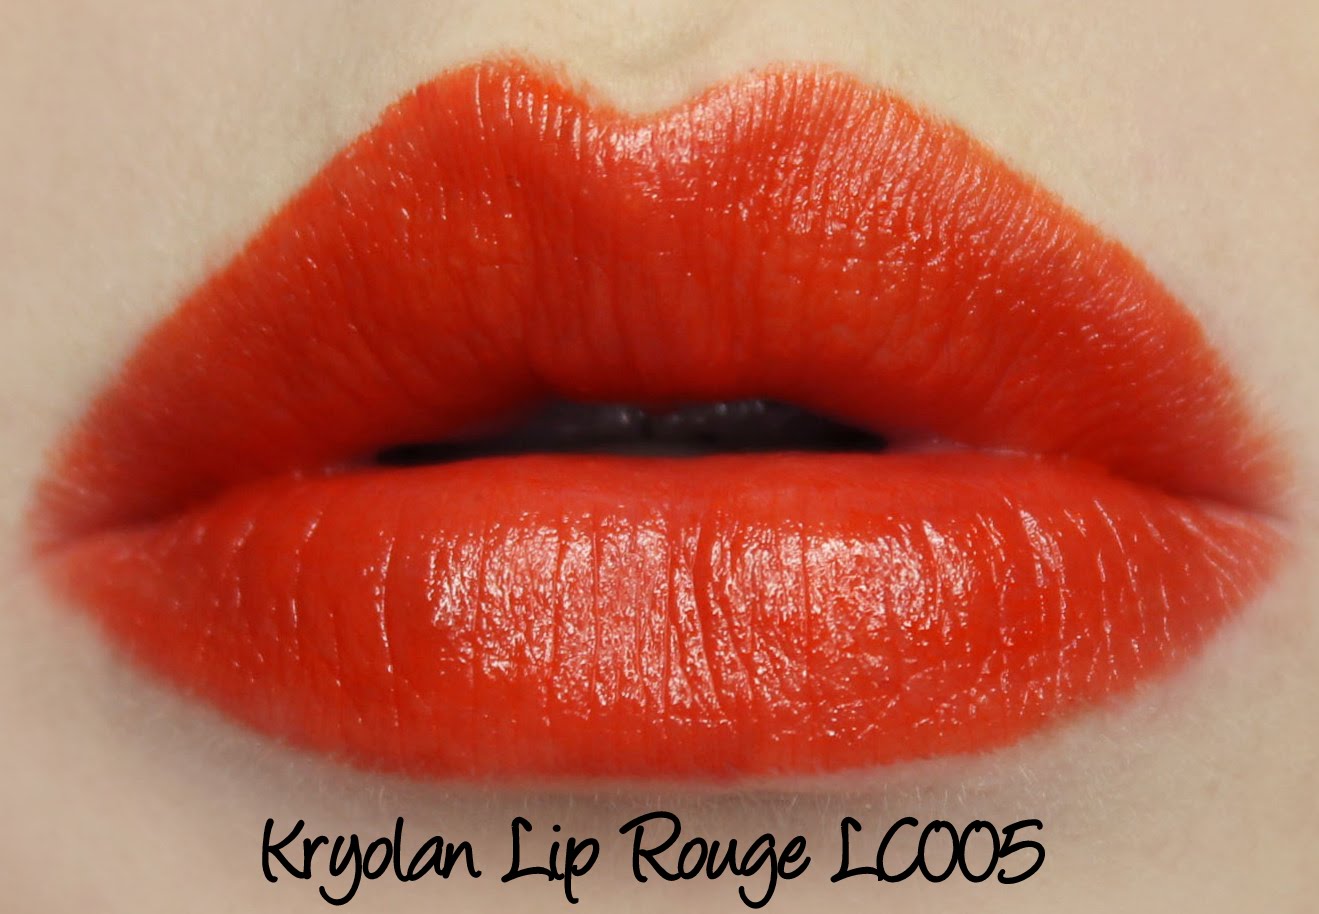 Kryolan Lip Rouge Classic Lipstick LC005 Swatches & Review